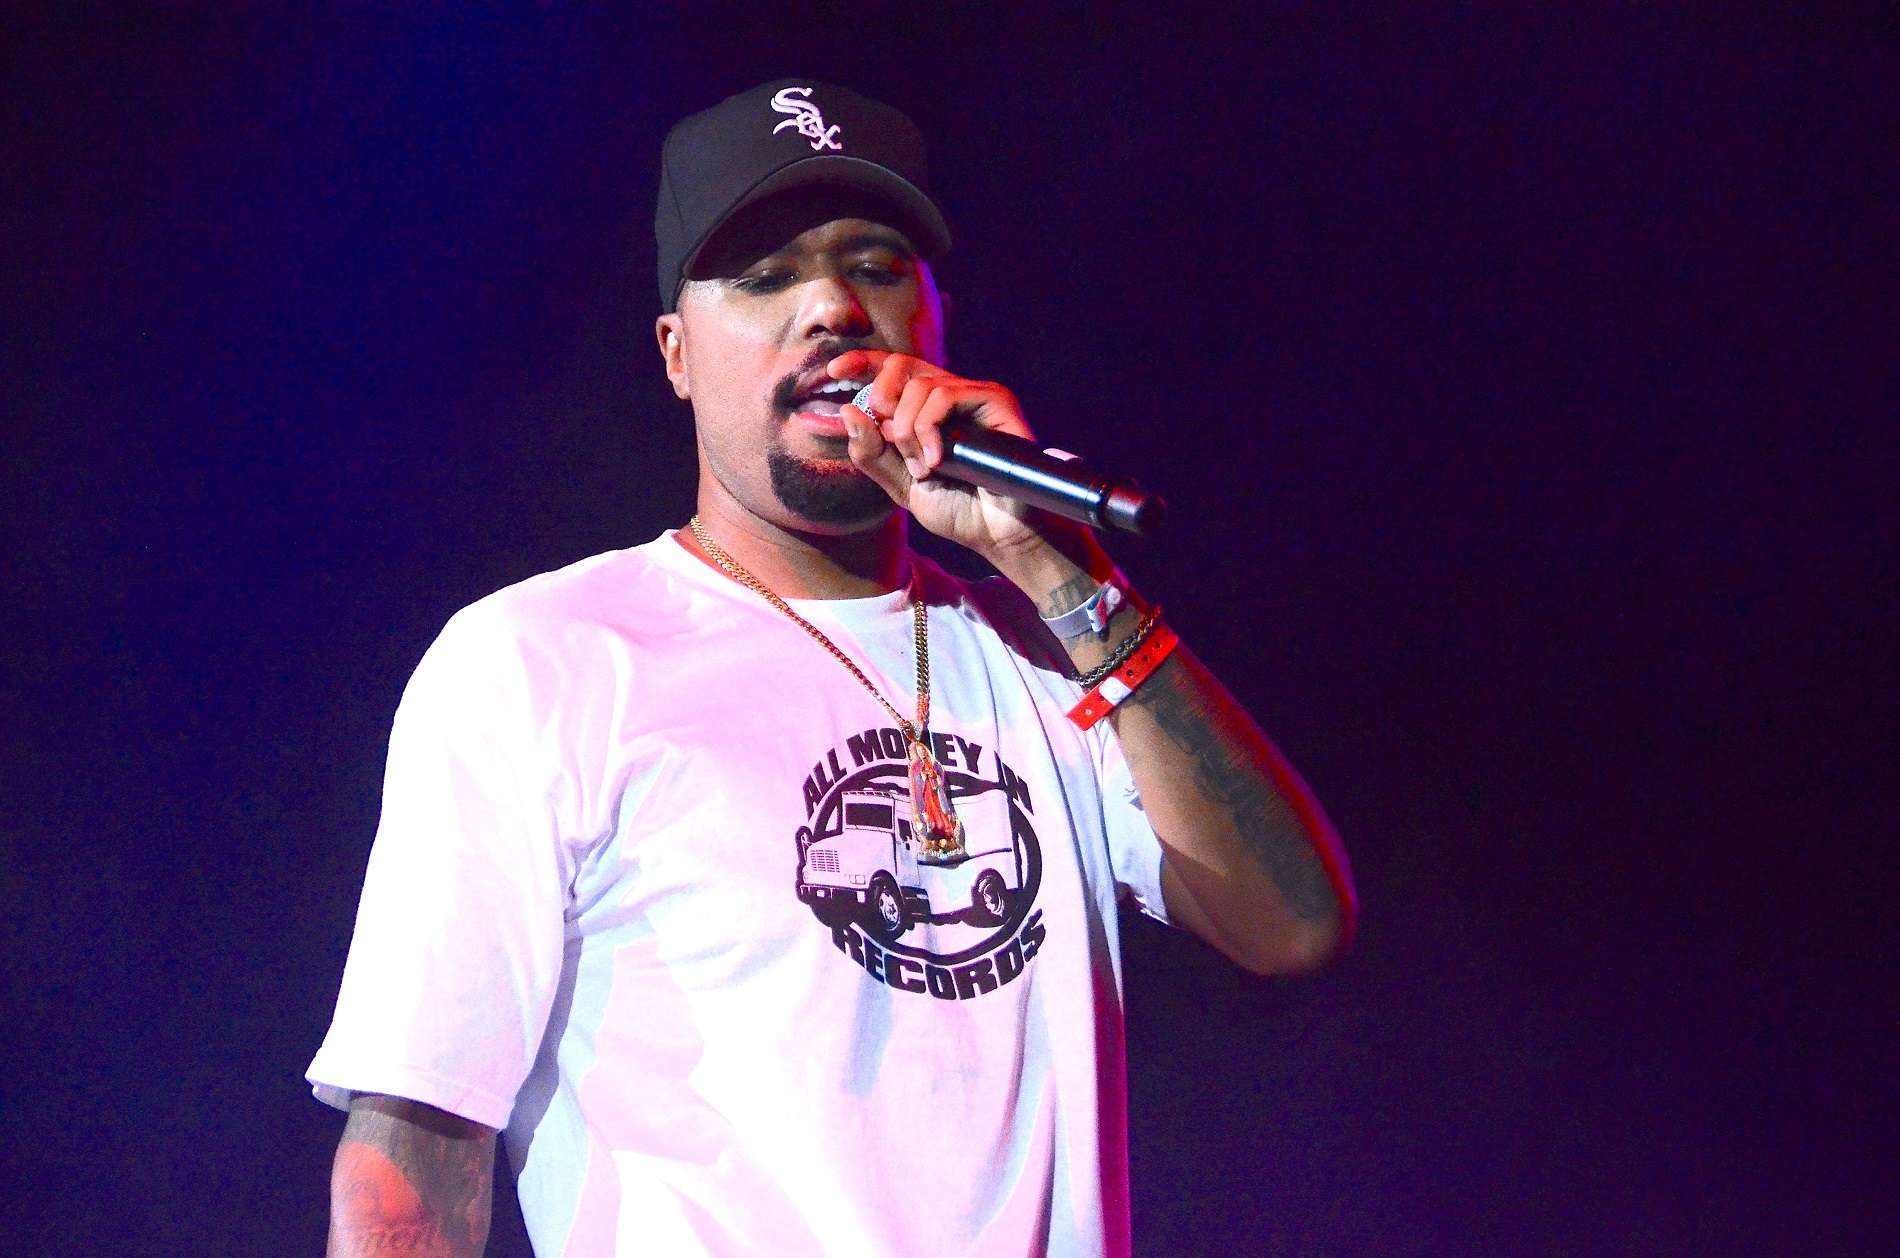 Dom Kennedy Donned All Money In Shirt In Honor Of The Late Nipsey Hussle. (Photo by: Bertram Keller | L.A. Sentinel)